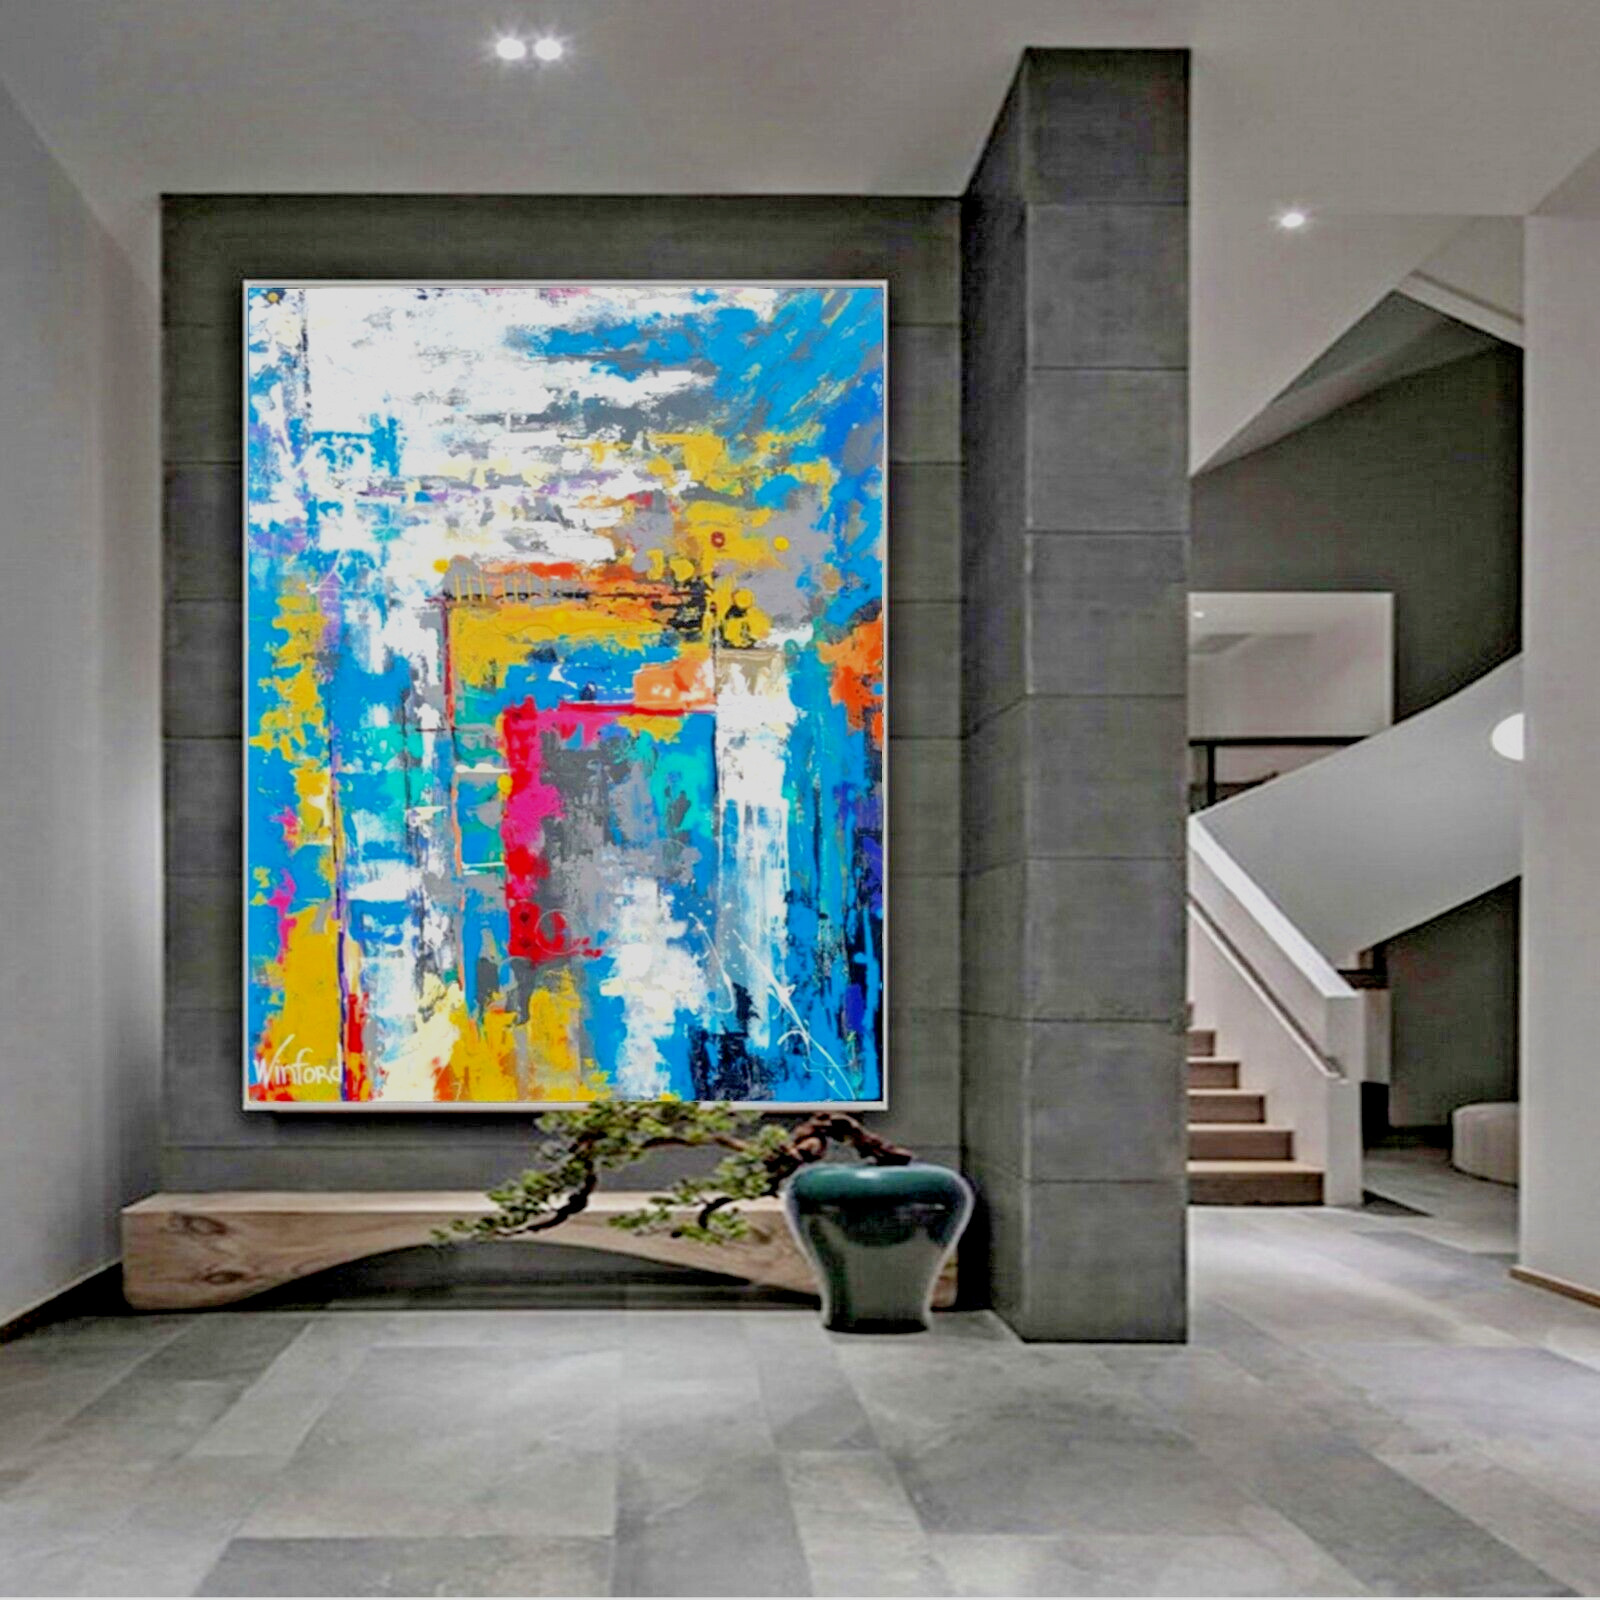 Sale Abstract Caribbean Colors HANDMADE 60H X 48W Painting Winford 2,495 Now 995